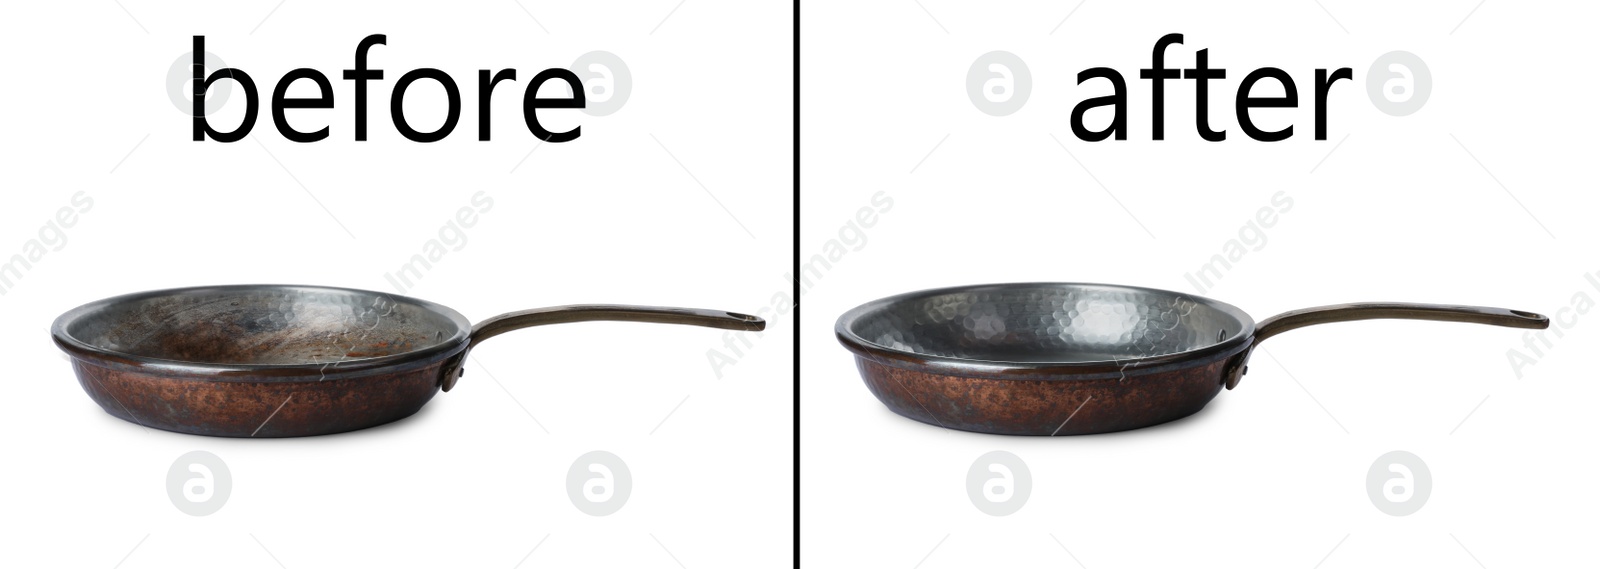 Image of Frying pan before and after cleaning on white background, collage. Banner design